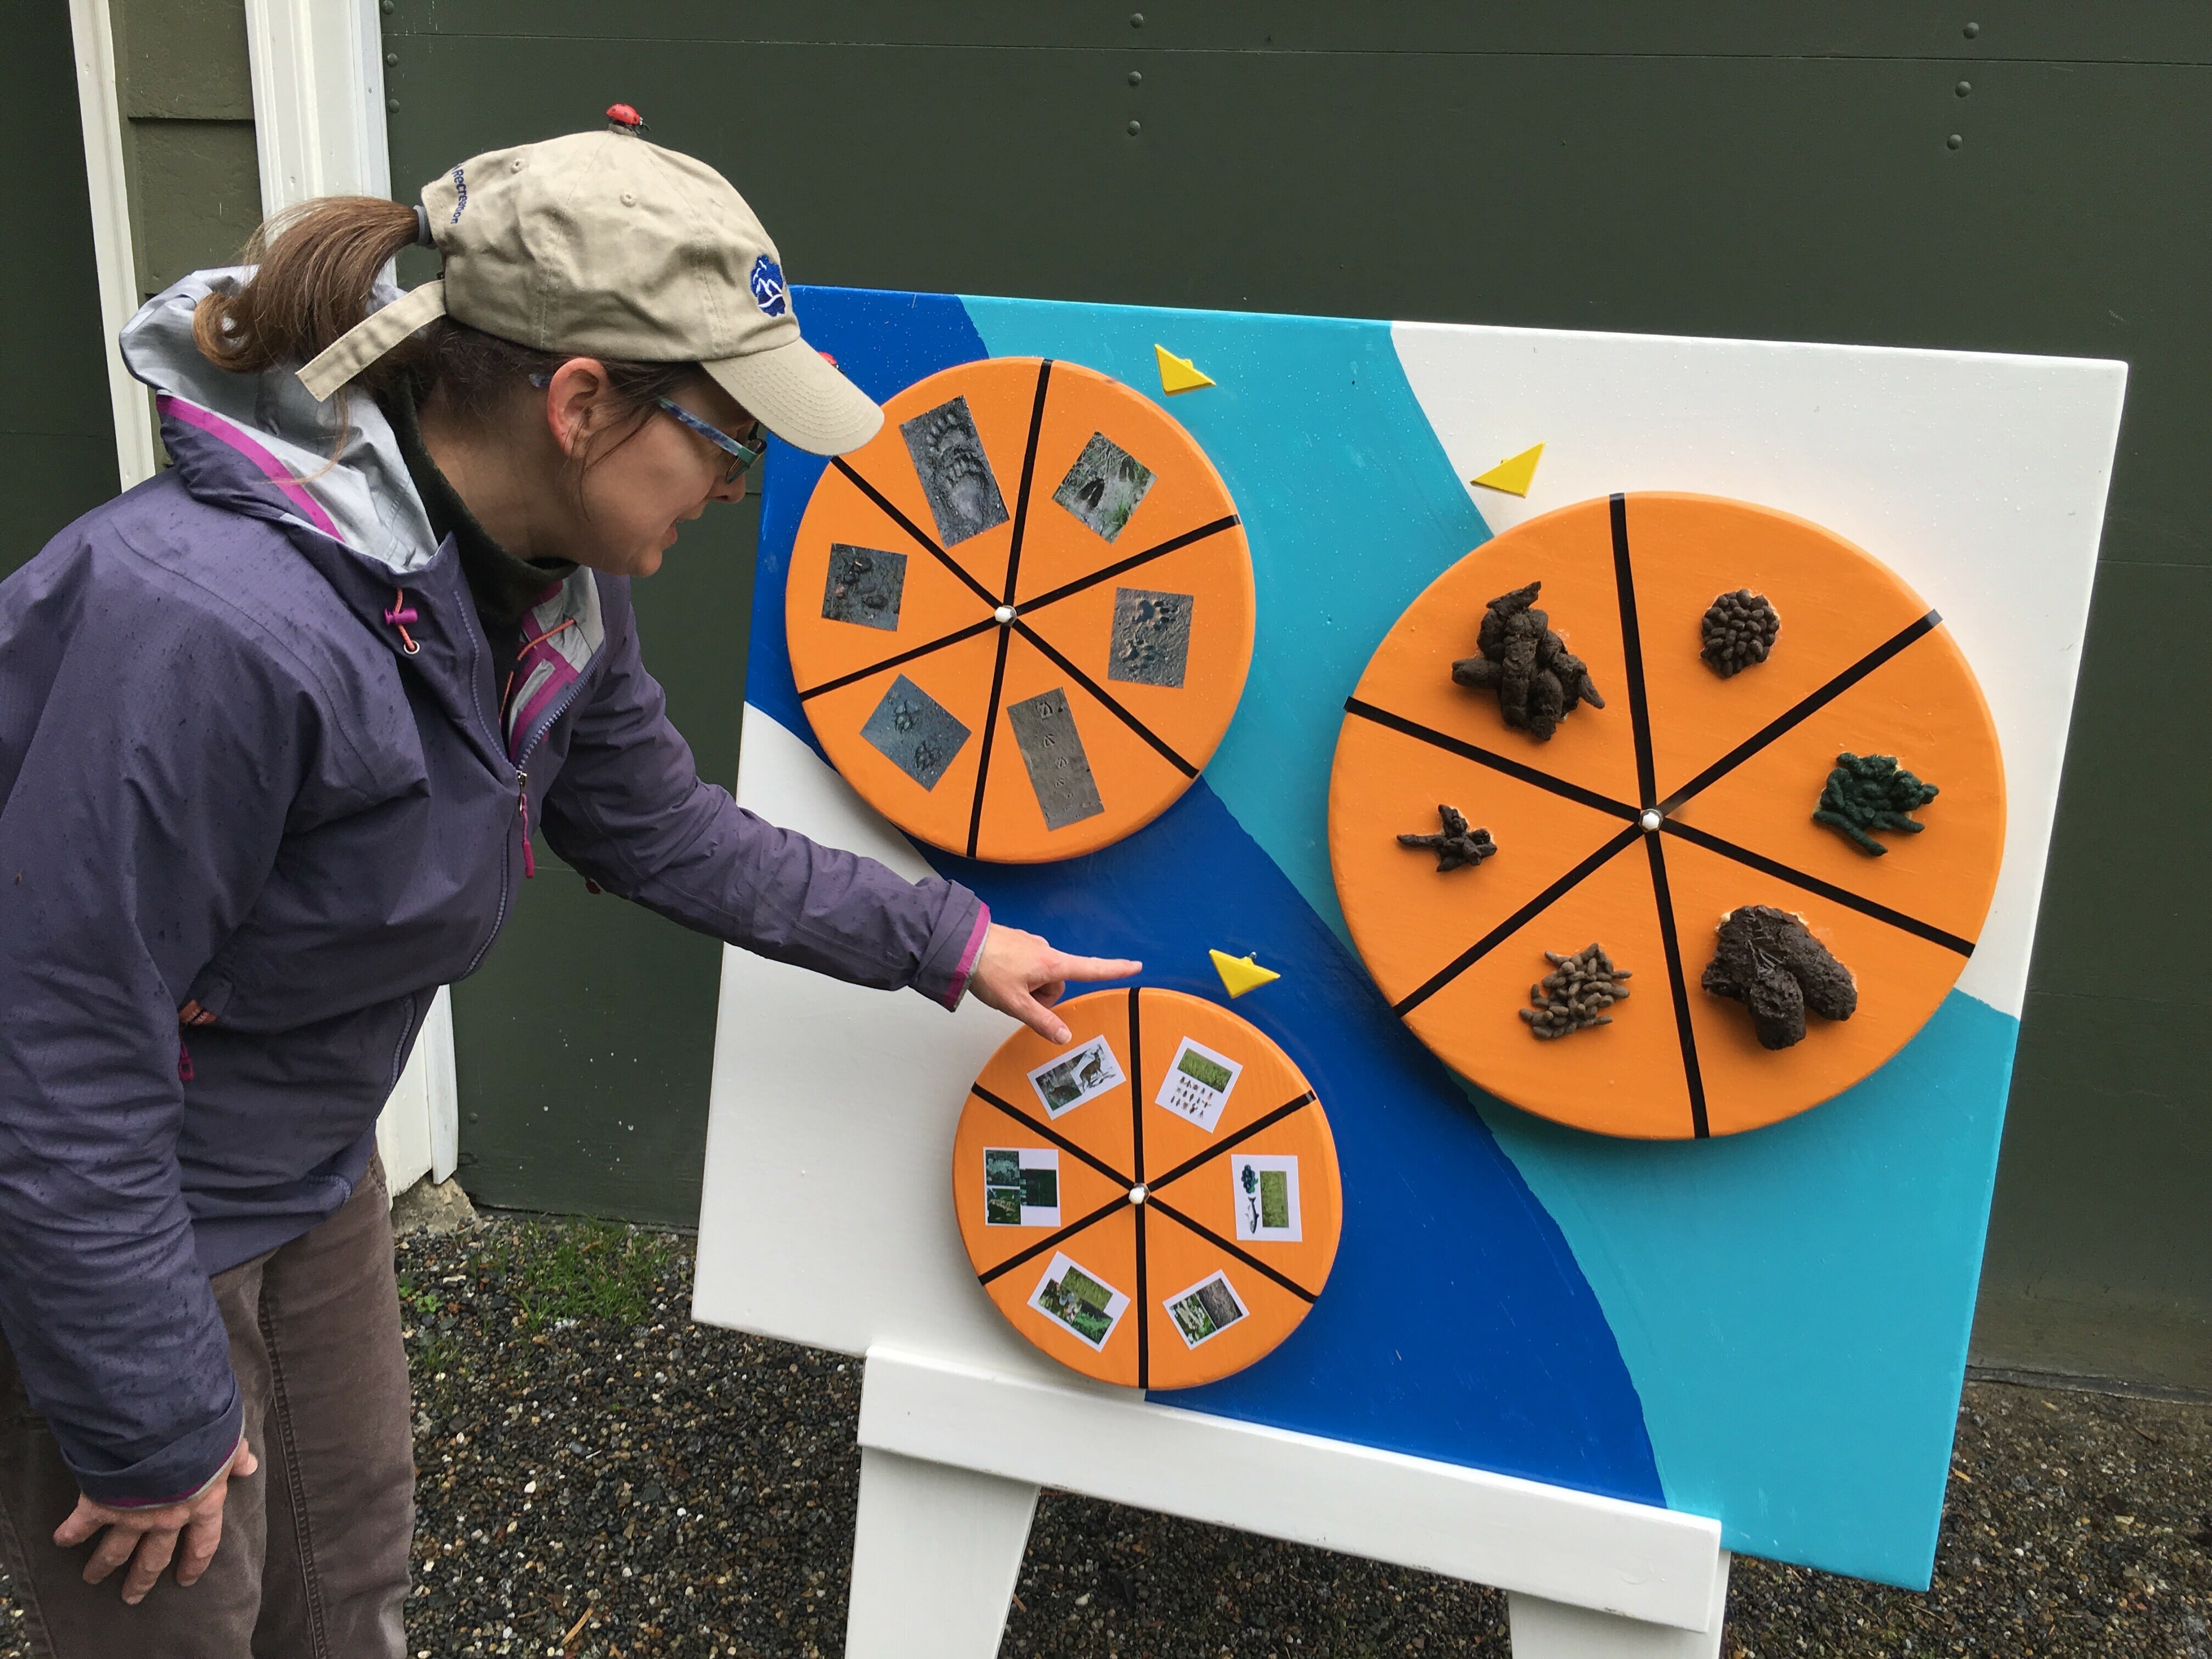 A women checks out the interactive display of scat during Poop in the Park at the Arboretum.